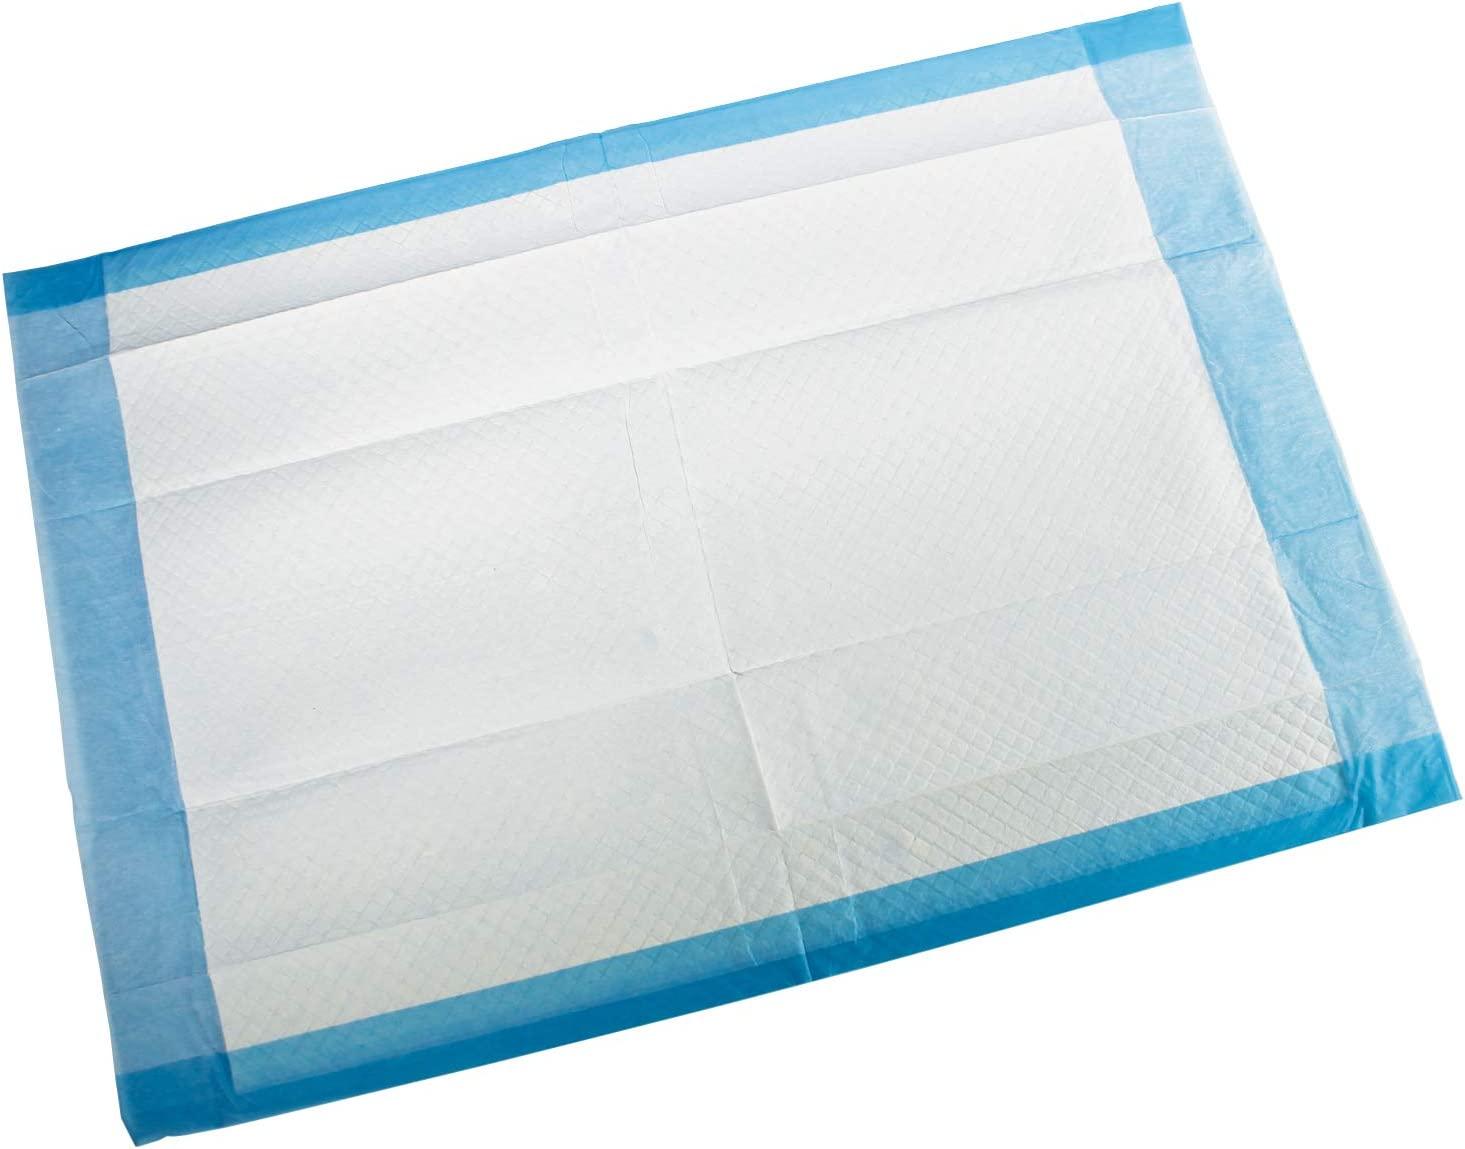 Disposable Absorbent Underpads, 17 x 24, Pack of 100